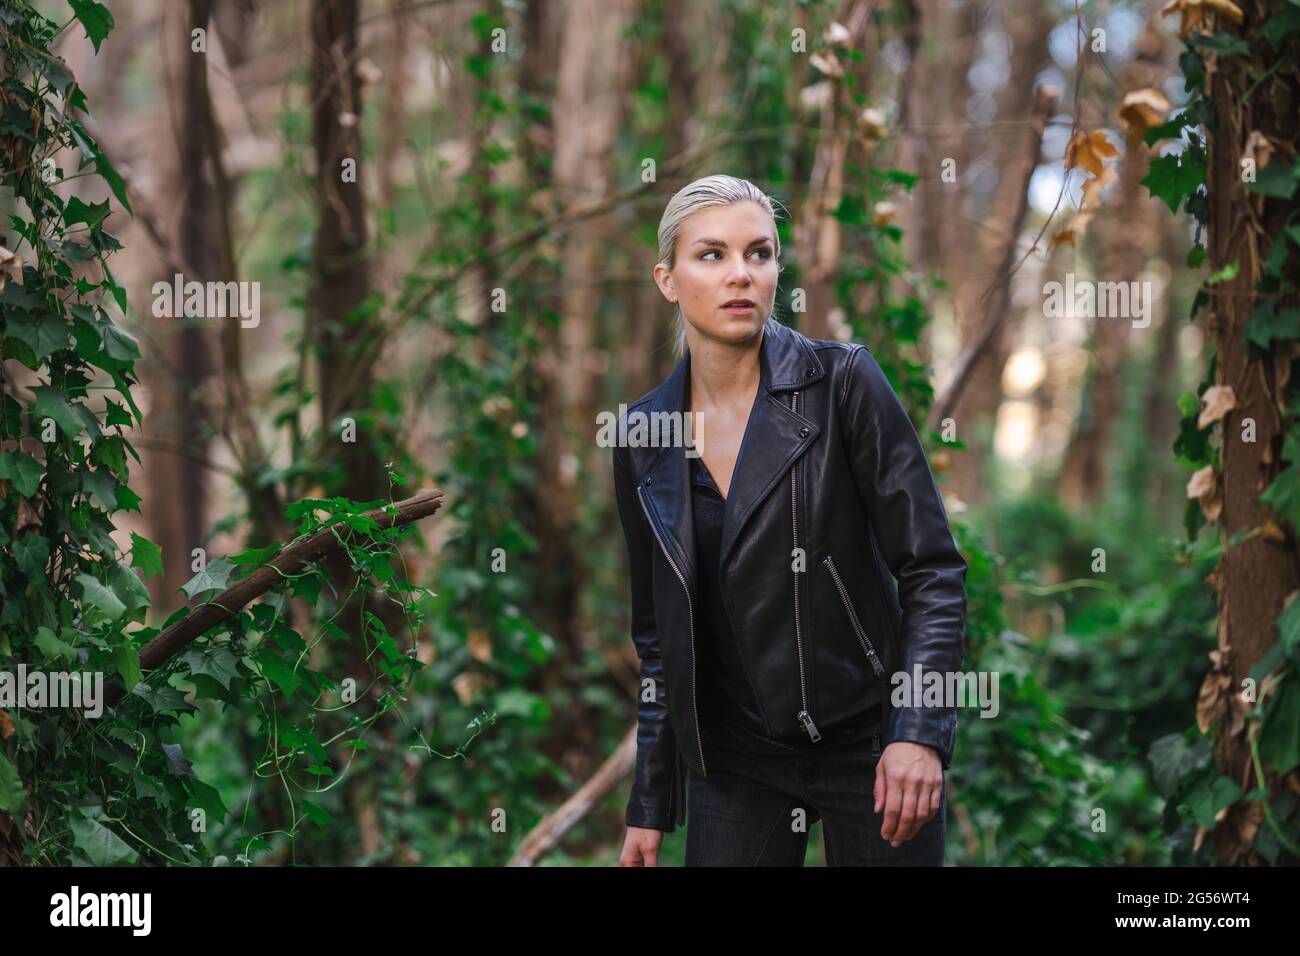 Fashion in unusual places, Young Woman in Edgy Motorcycle Jacket in the Forest Stock Photo